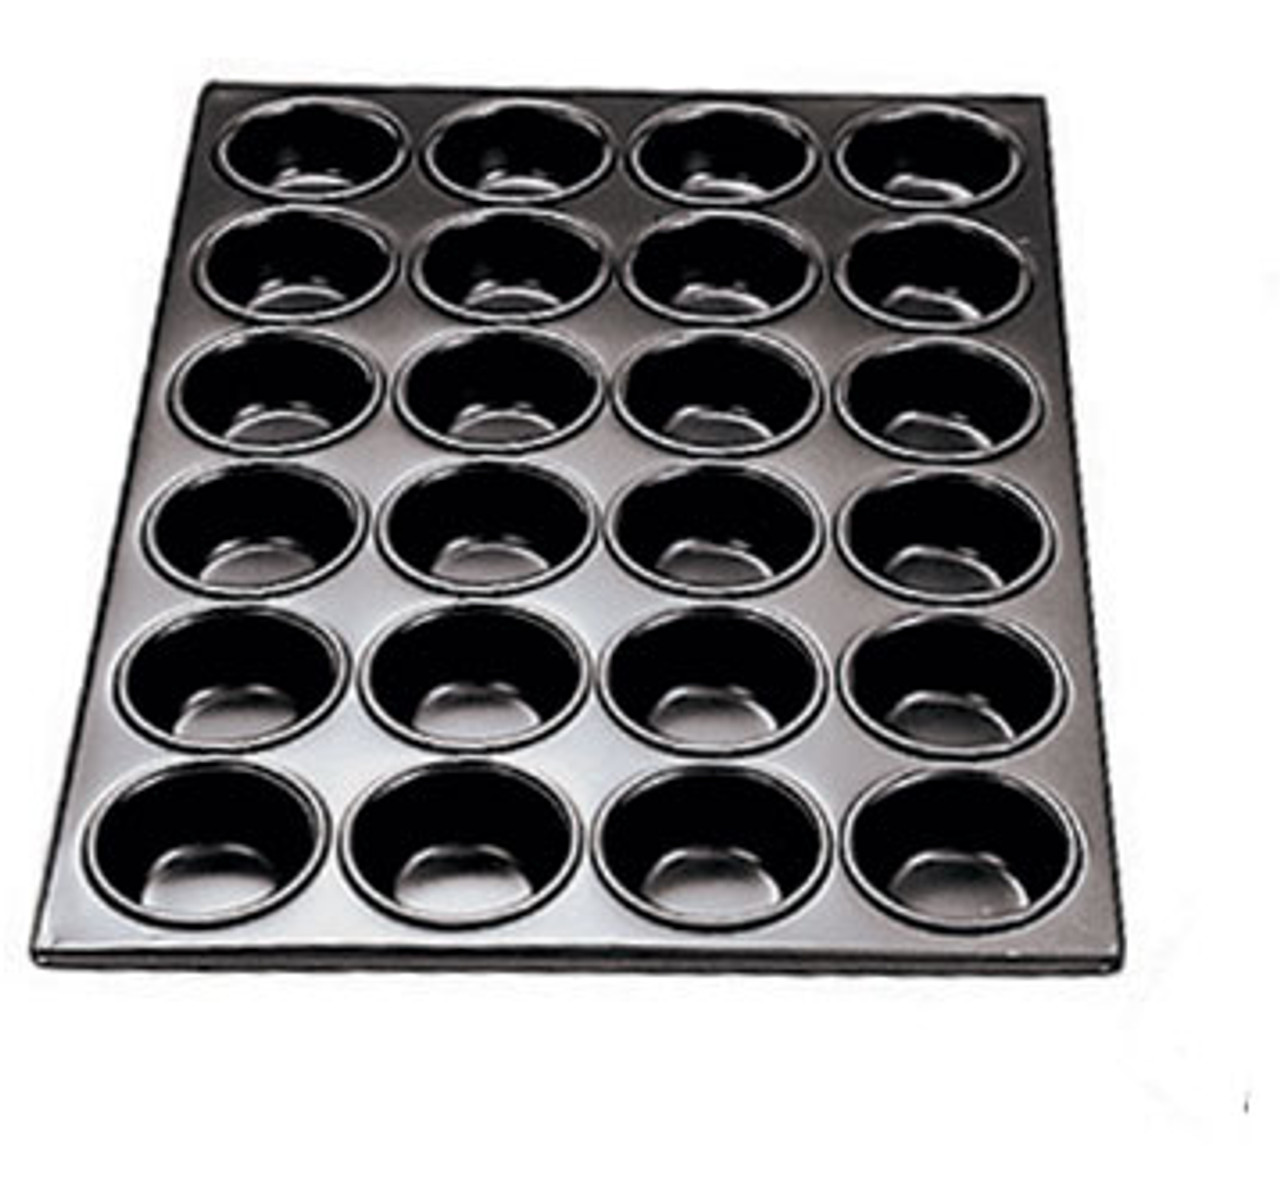 https://cdn11.bigcommerce.com/s-3n1nnt5qyw/images/stencil/1280x1280/products/3073/3676/adcraft-muffin-pan-alum-non-stick-model-am-ns-24-12__29869.1629739900.jpg?c=1